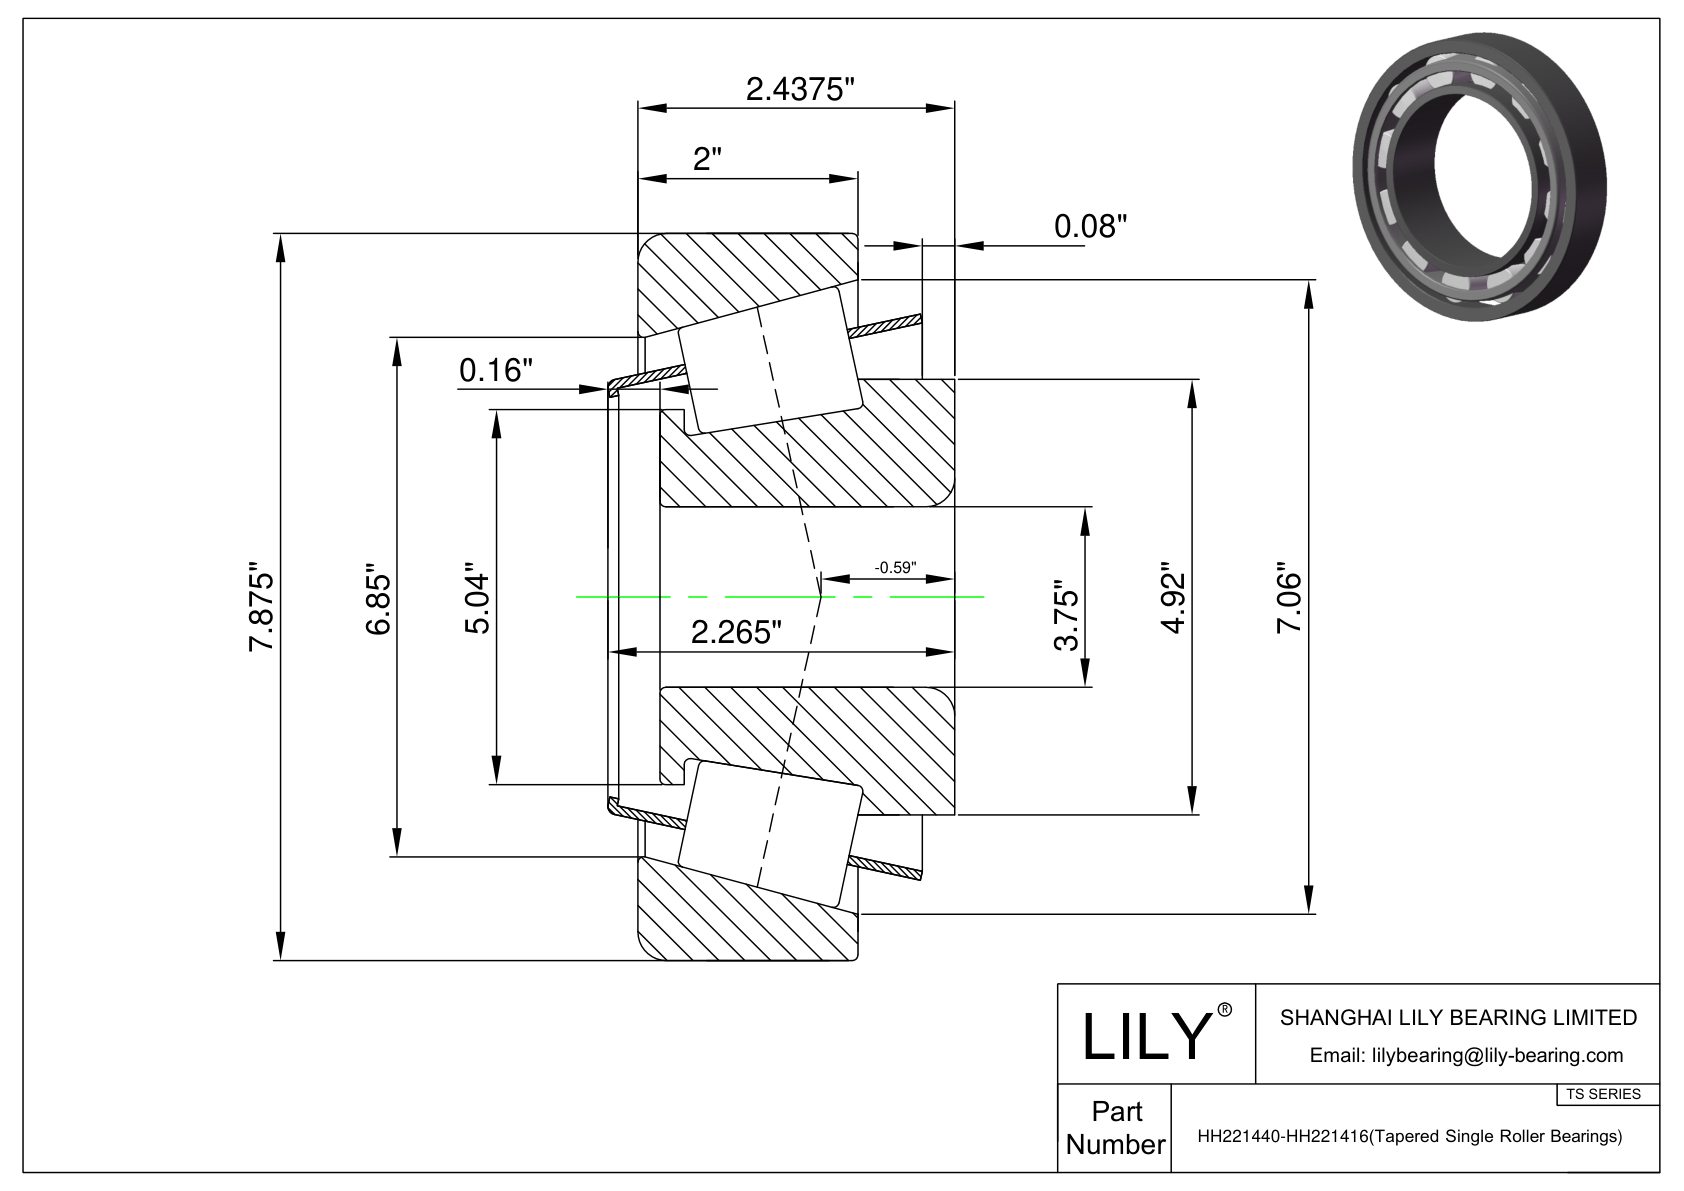 HH221440-HH221416 TS (Tapered Single Roller Bearings) (Imperial) cad drawing